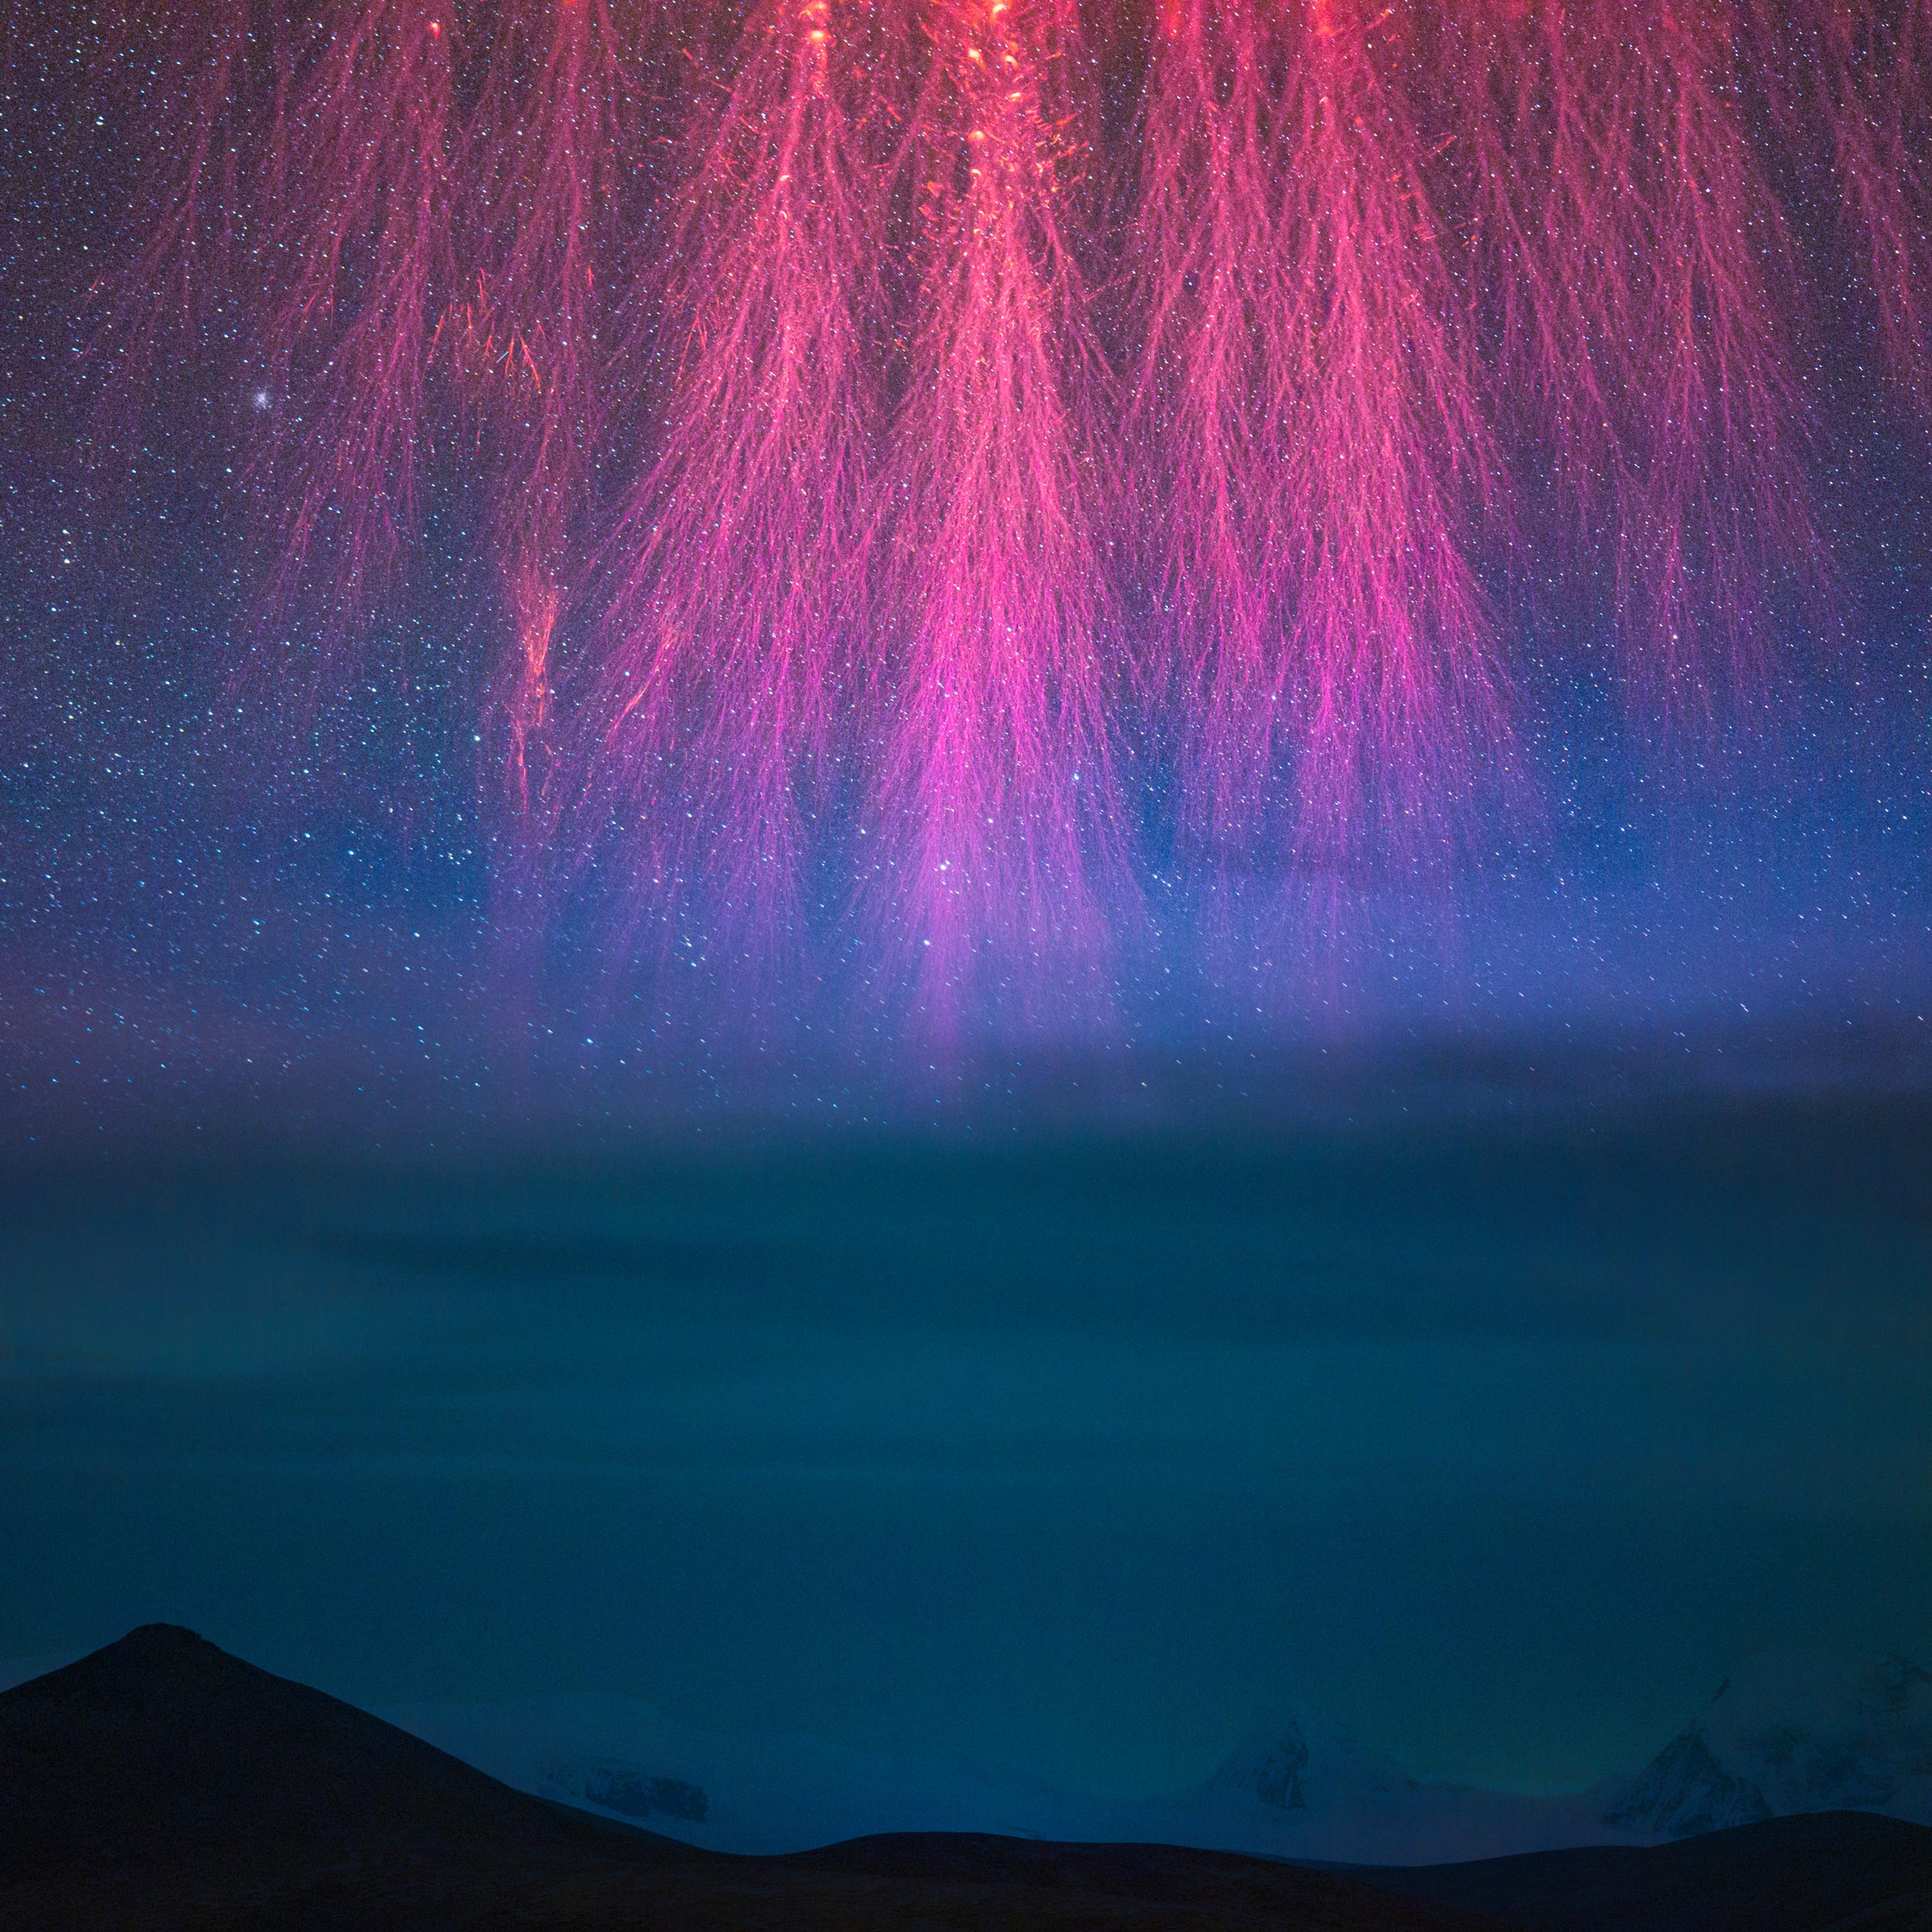 Red/pink spikes with numerous branches reach down from the top of the image like lightning strikes over dark mountains